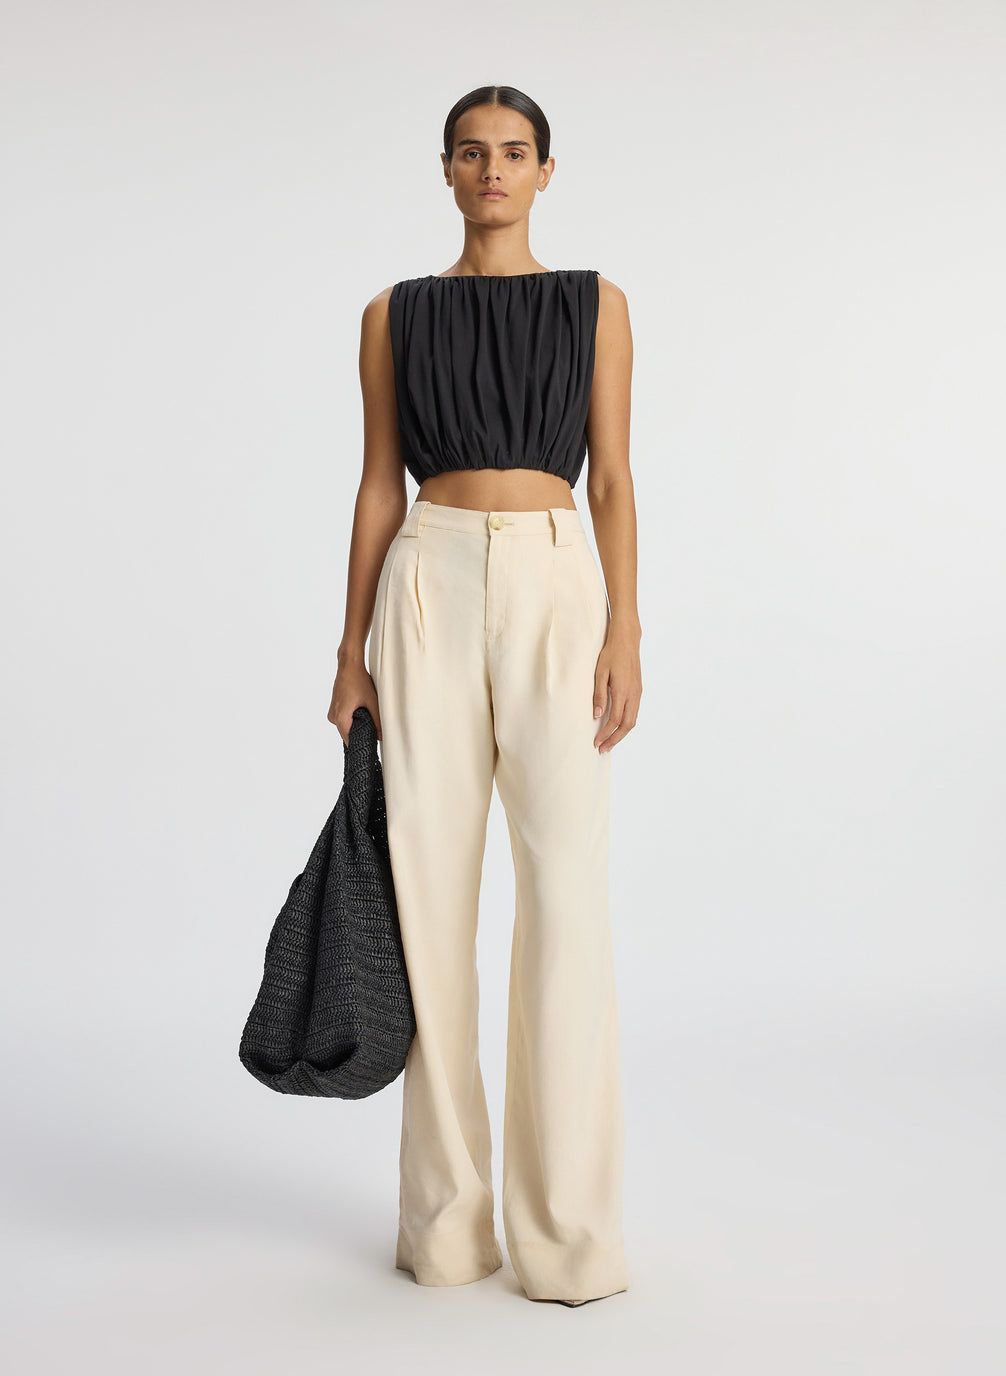 front view of woman wearing black sleeveless cropped top and beige wide leg pants